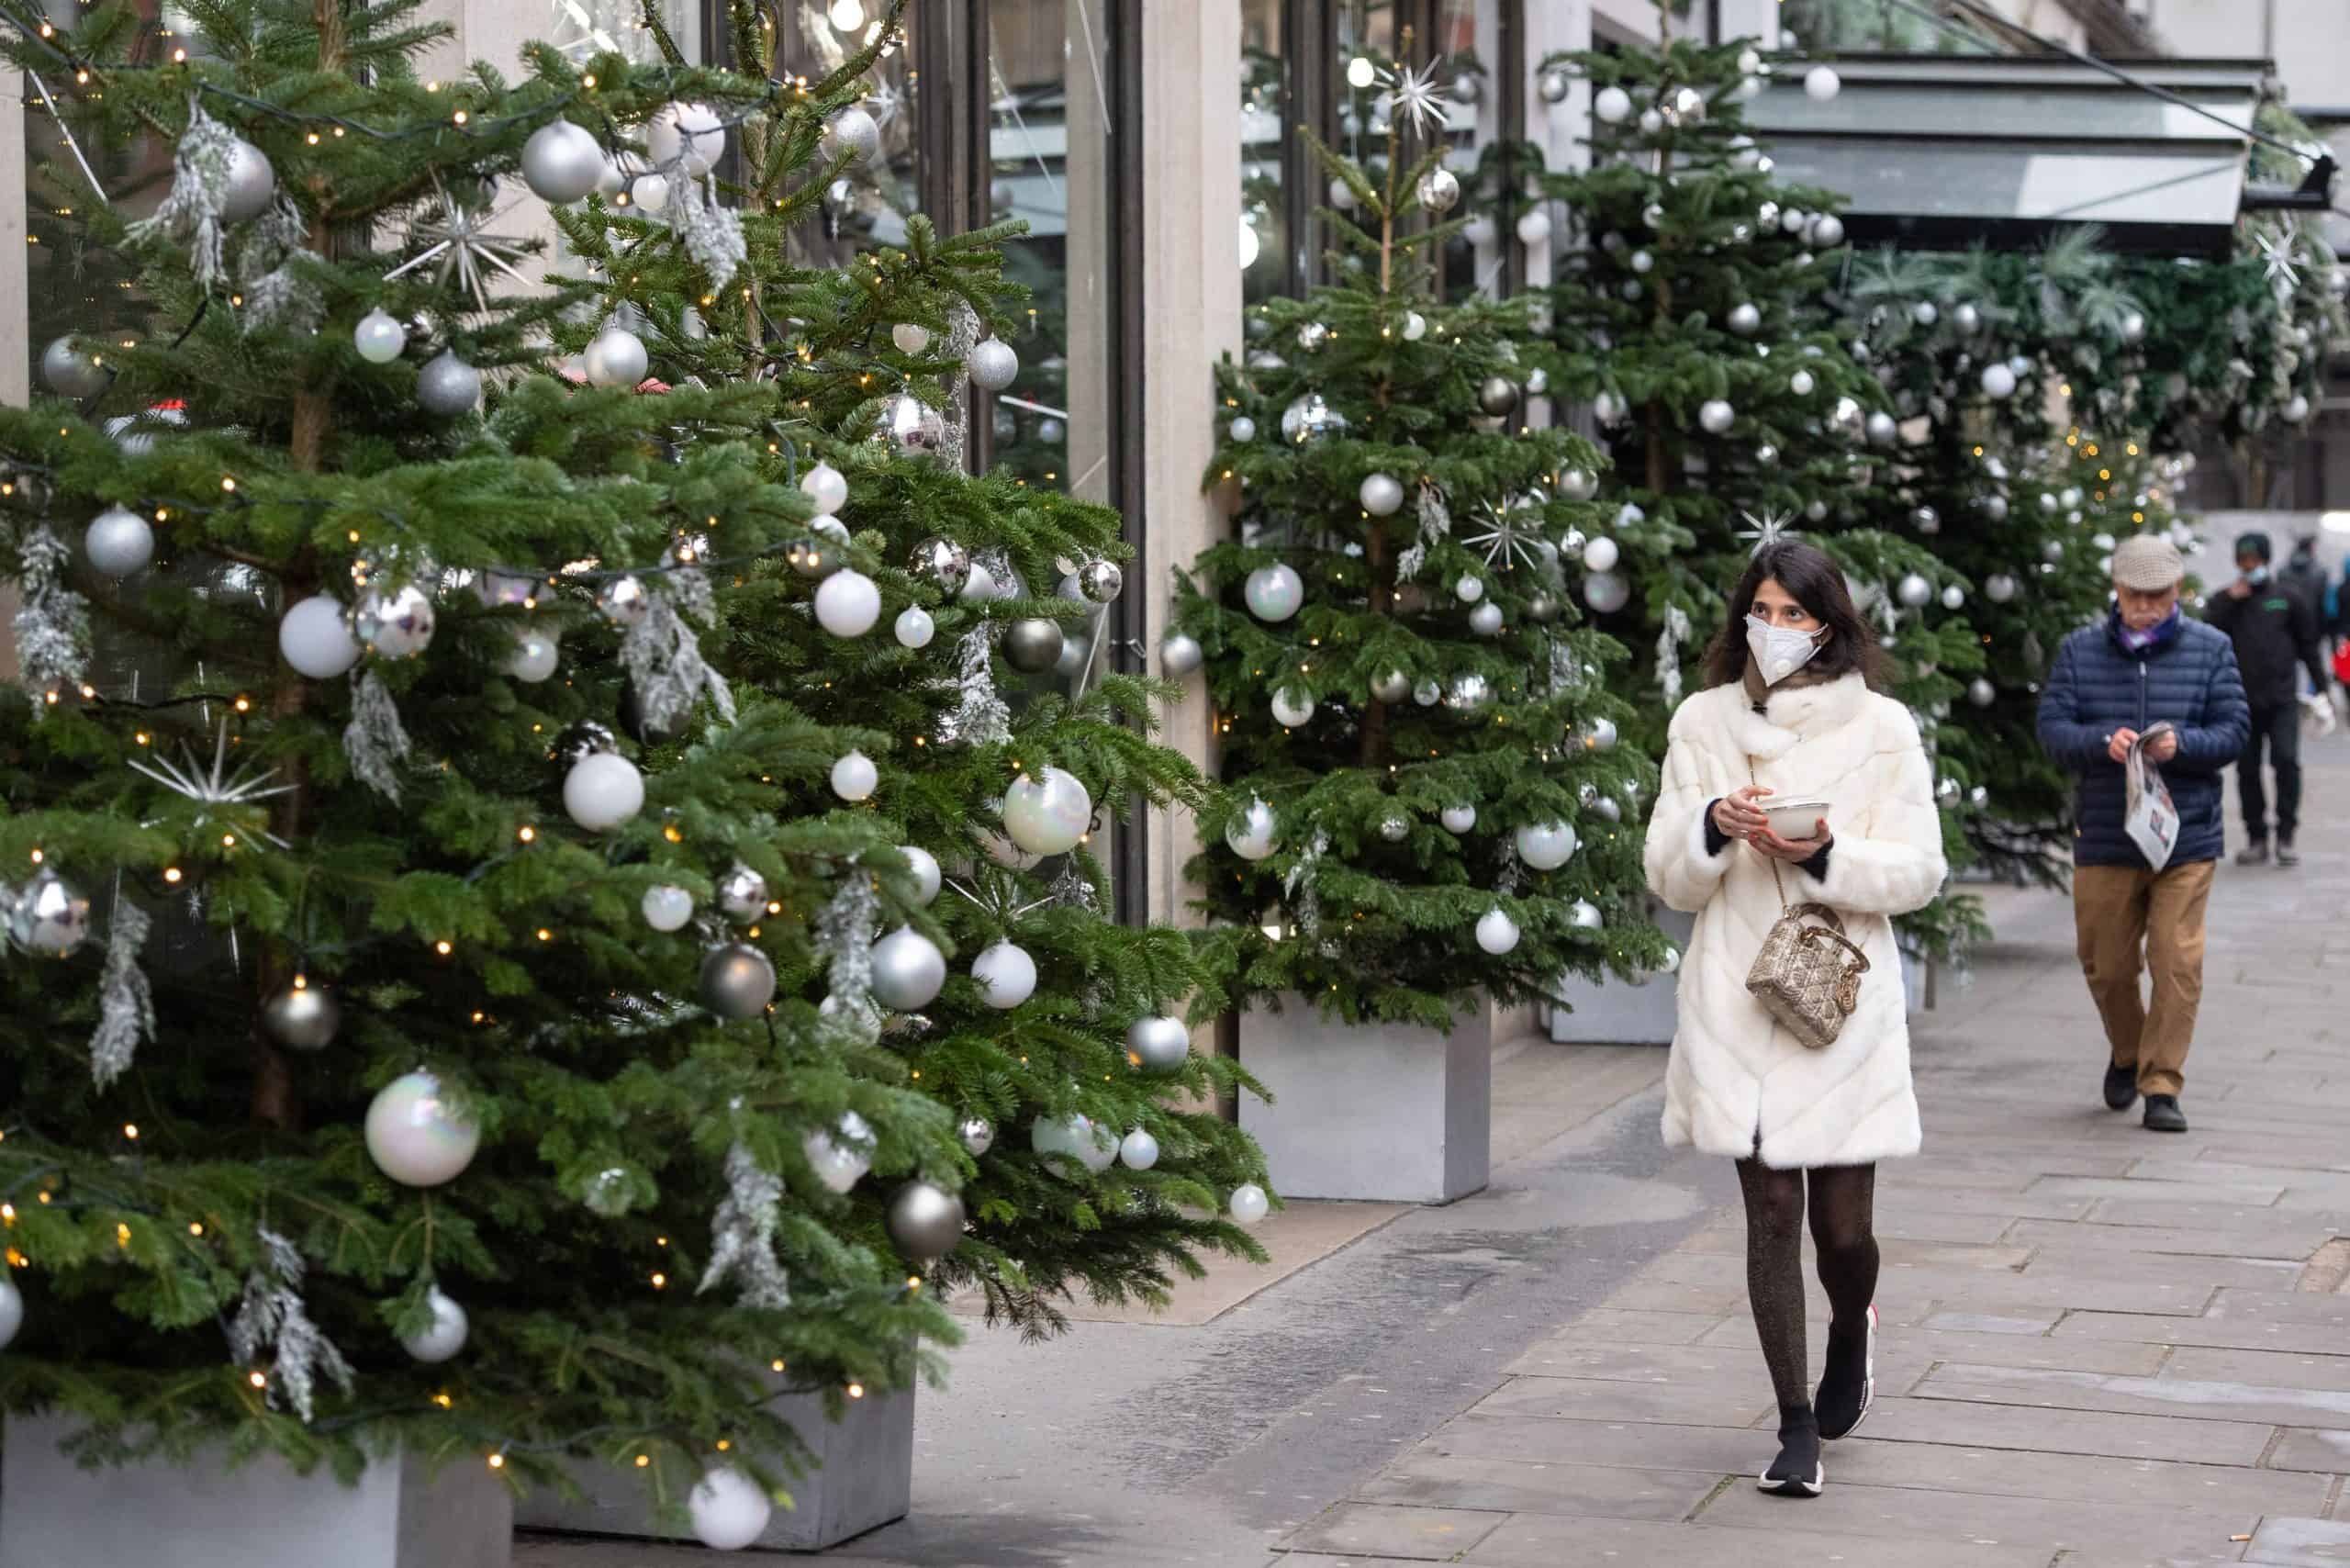 Get ready for a ‘nightmare’ Christmas, shoppers warned